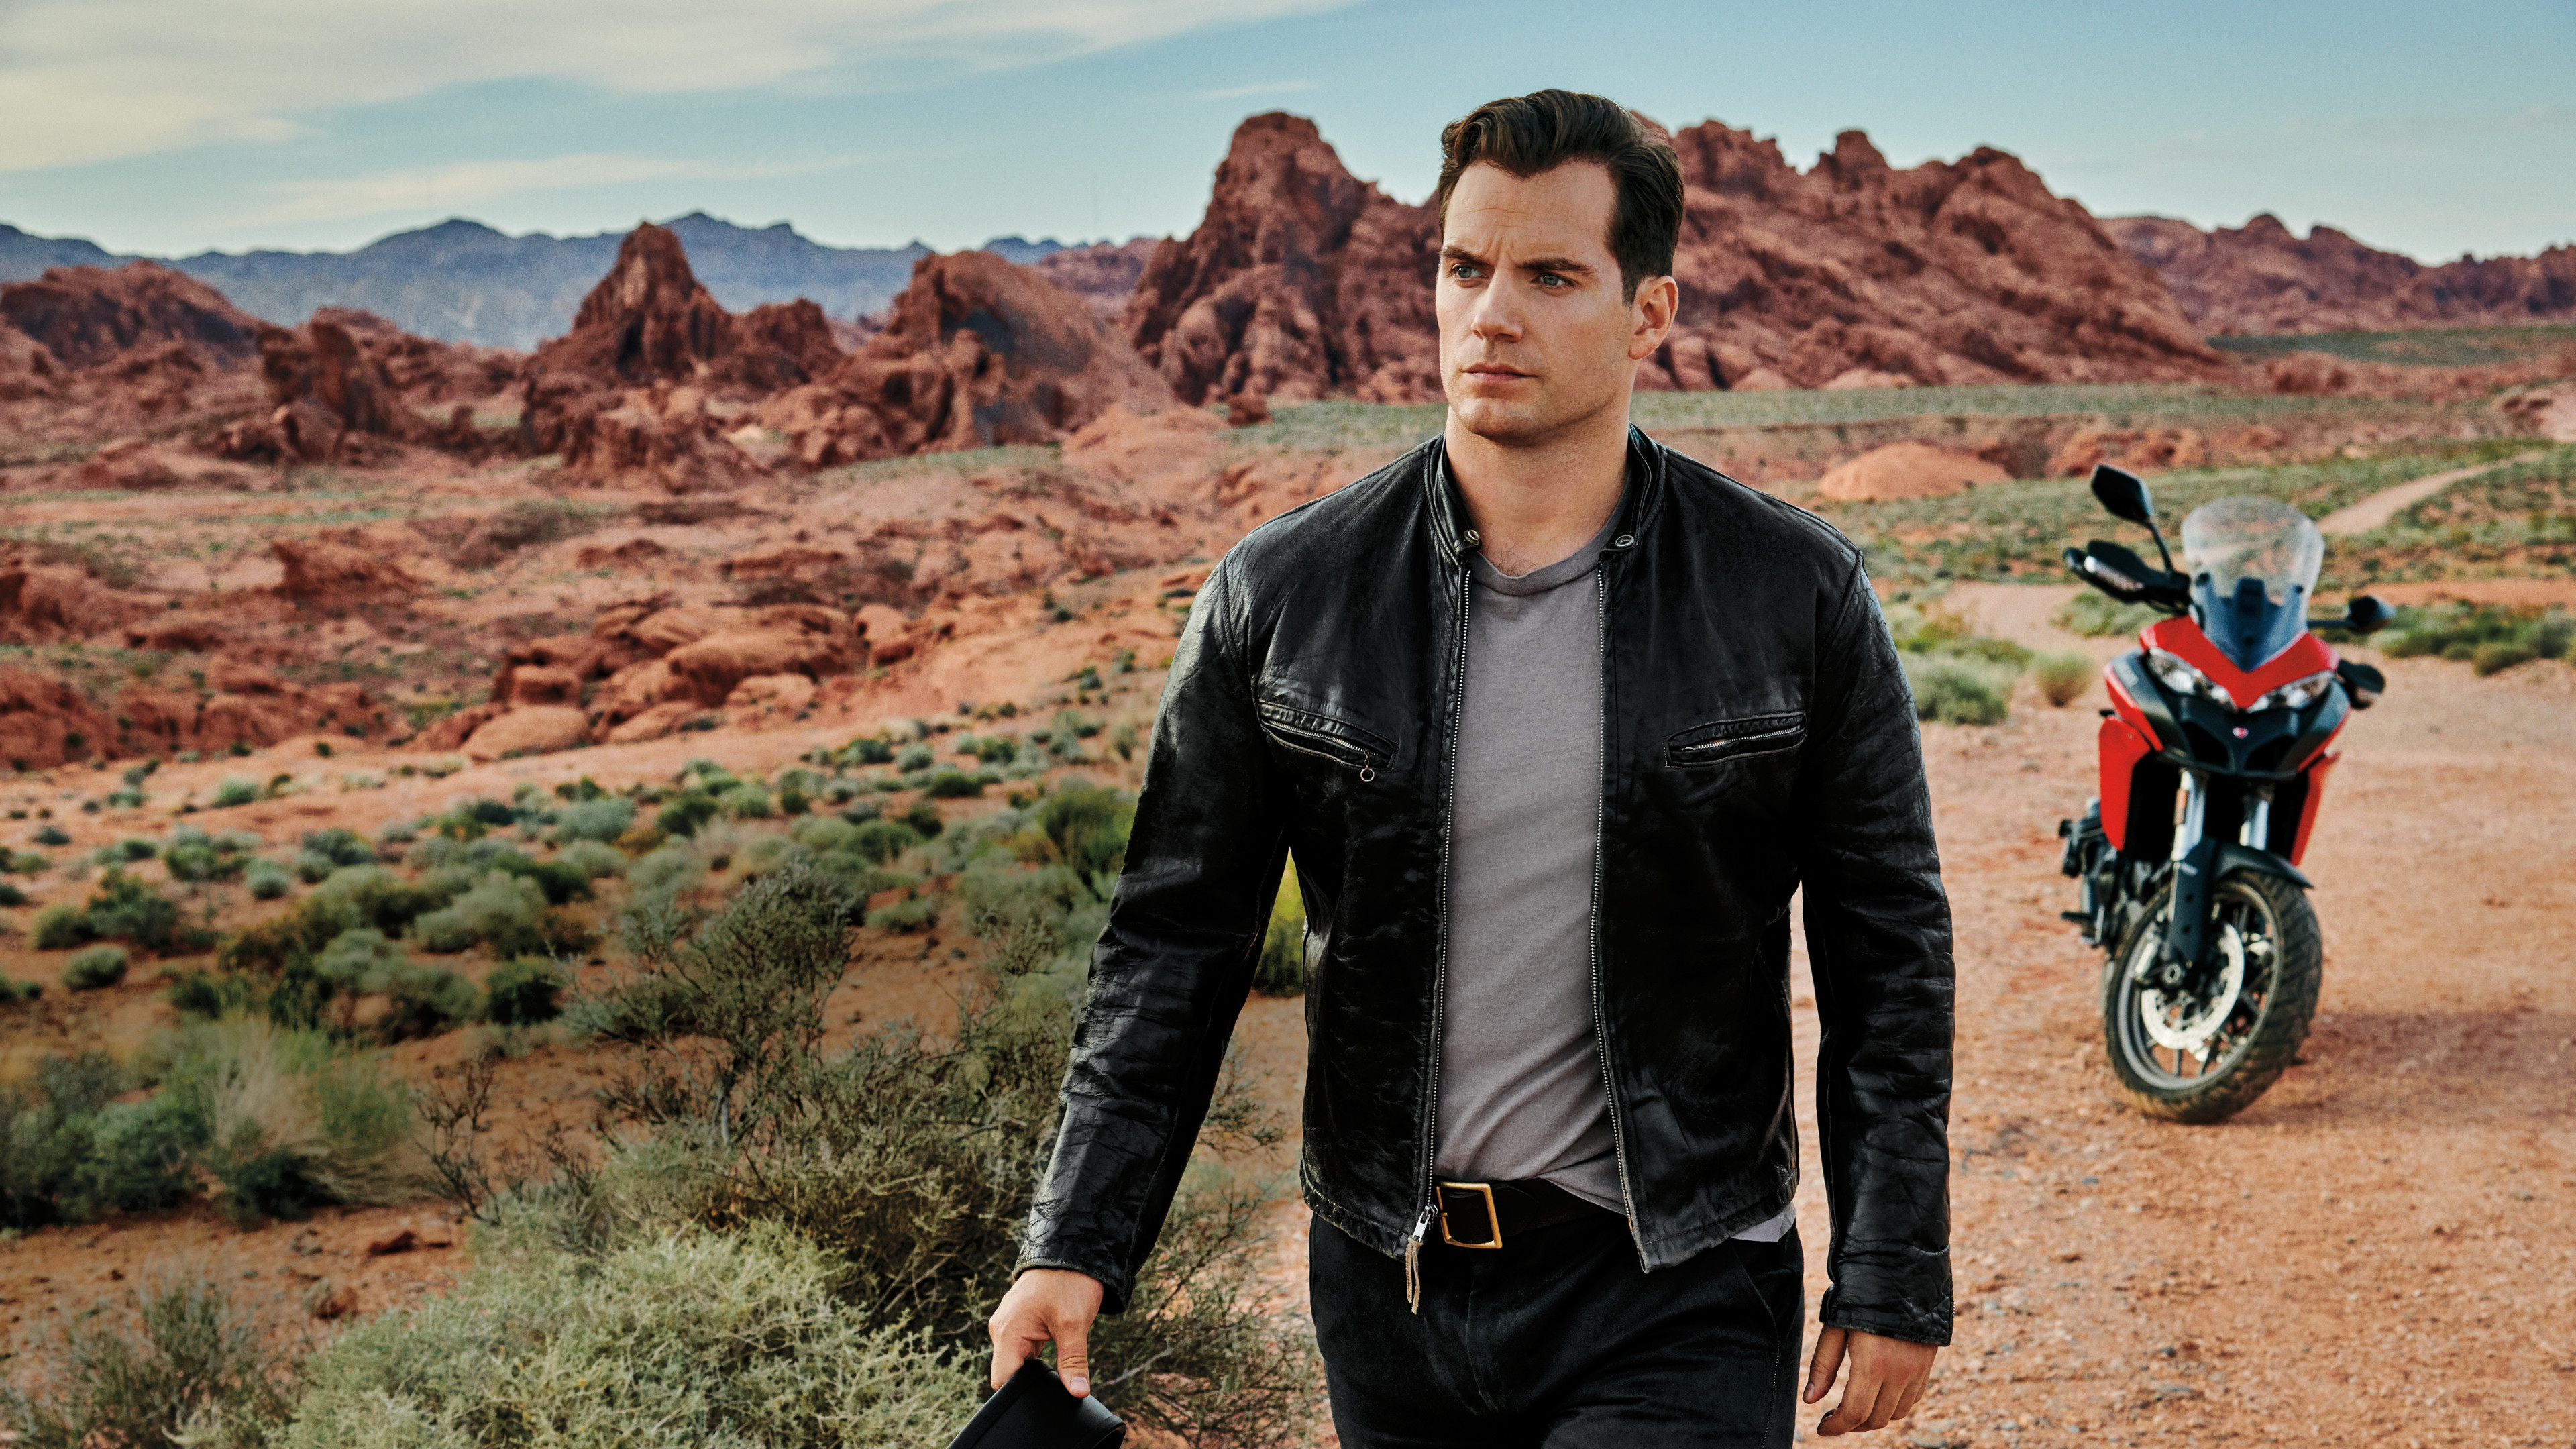 henry cavill mens journal 2019 1536949334 - Henry Cavill Mens Journal 2019 - male celebrities wallpapers, henry cavill wallpapers, hd-wallpapers, boys wallpapers, 4k-wallpapers